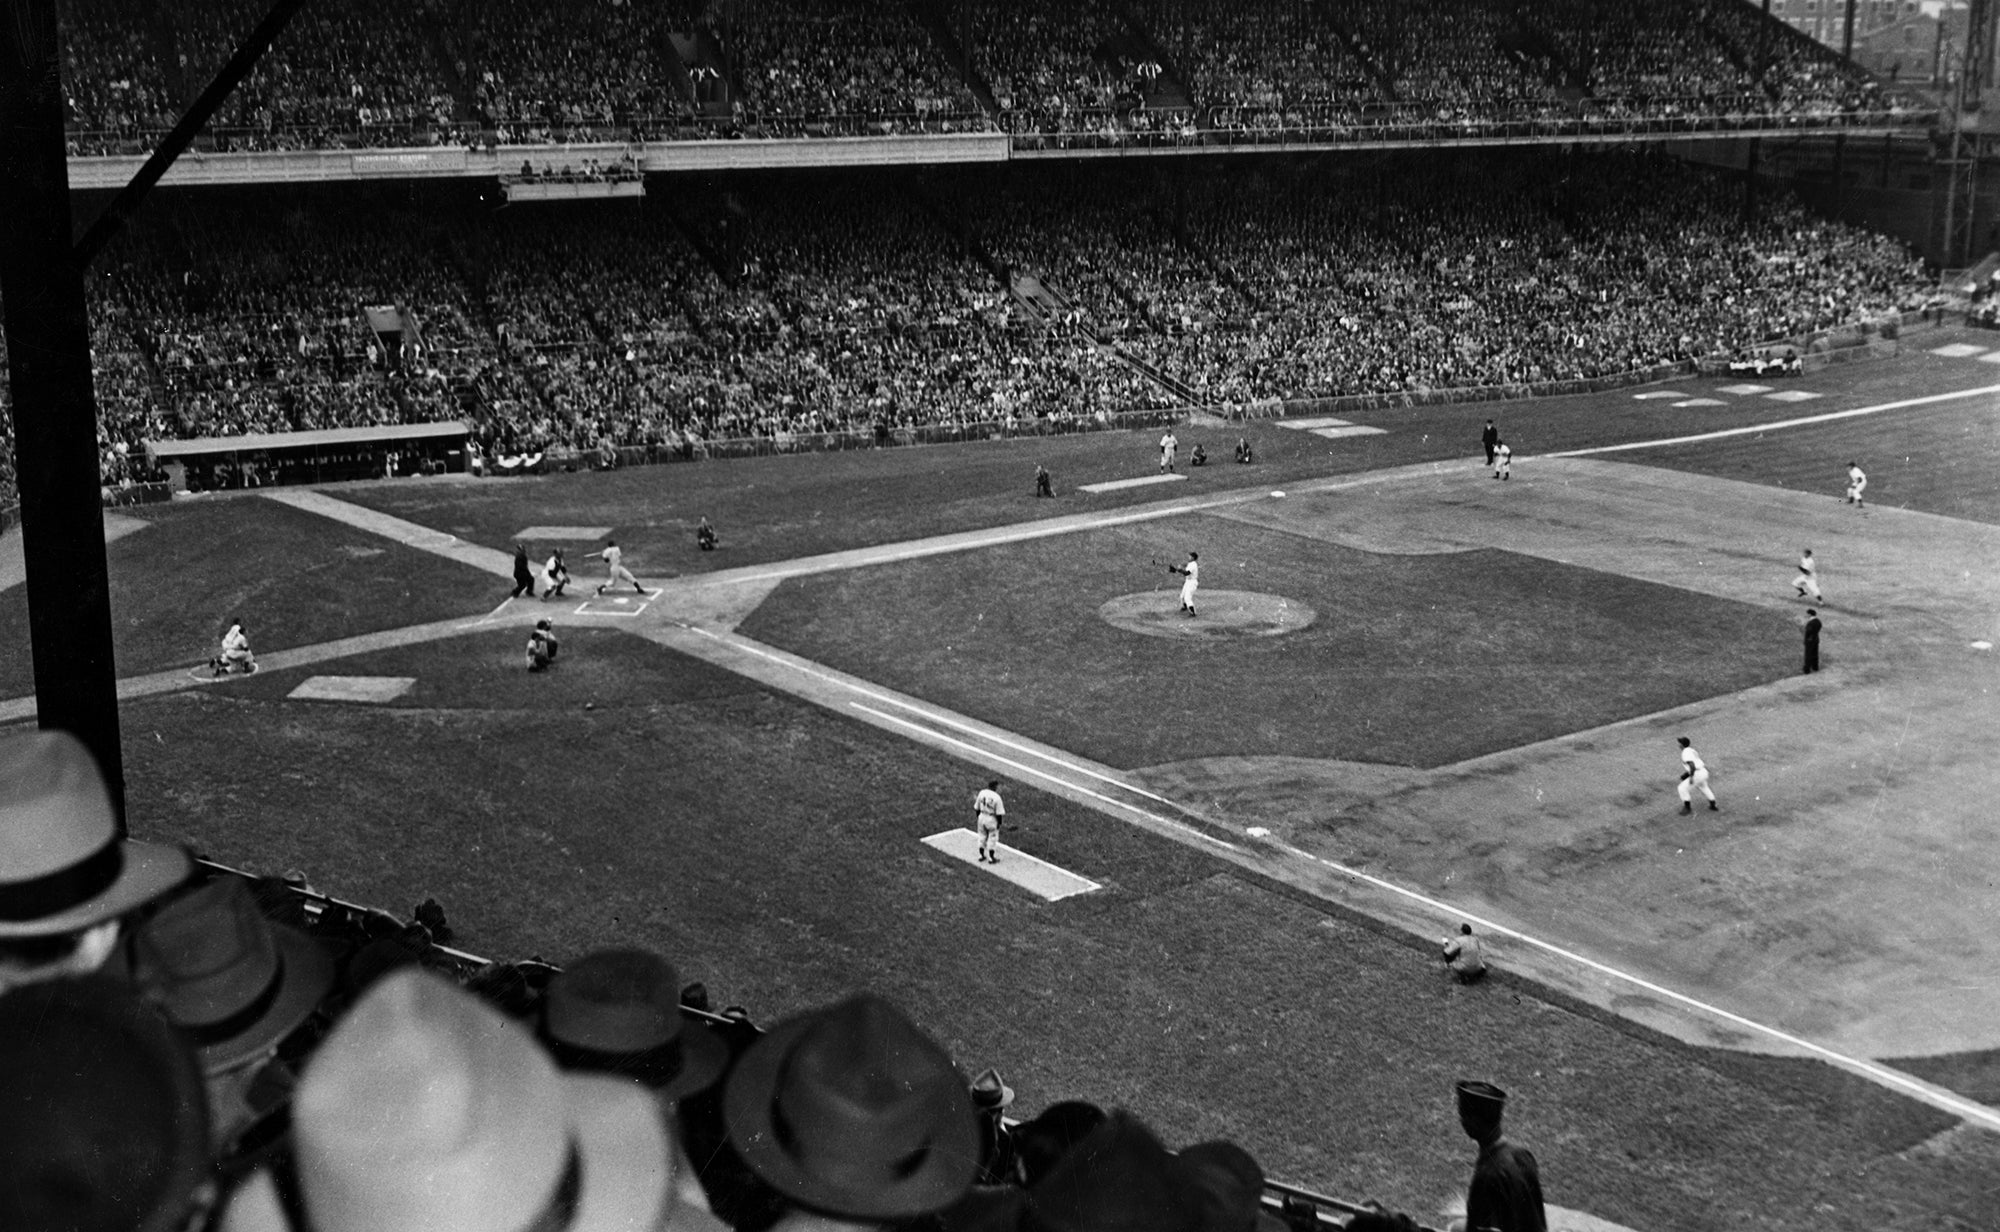 Night games gave access to baseball to millions